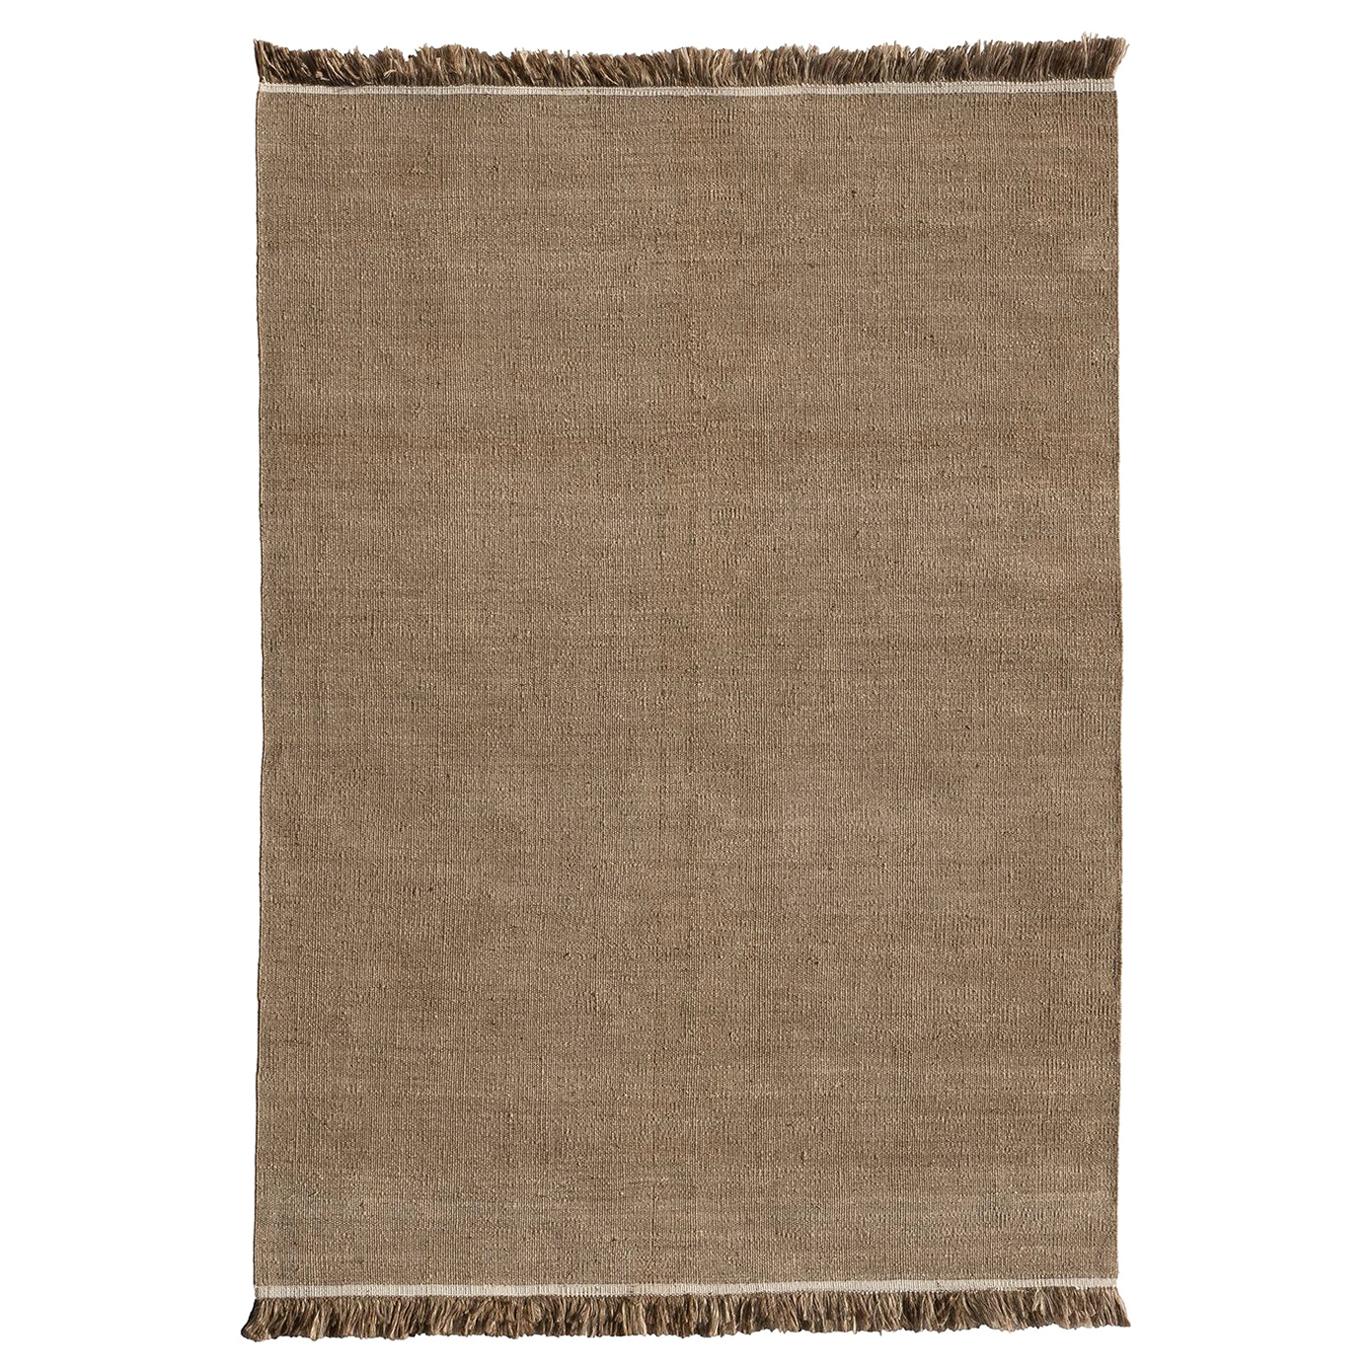 Nanimarquina Wellbeing Nettle Dhurrie Rug by Ilse Crawford, Small